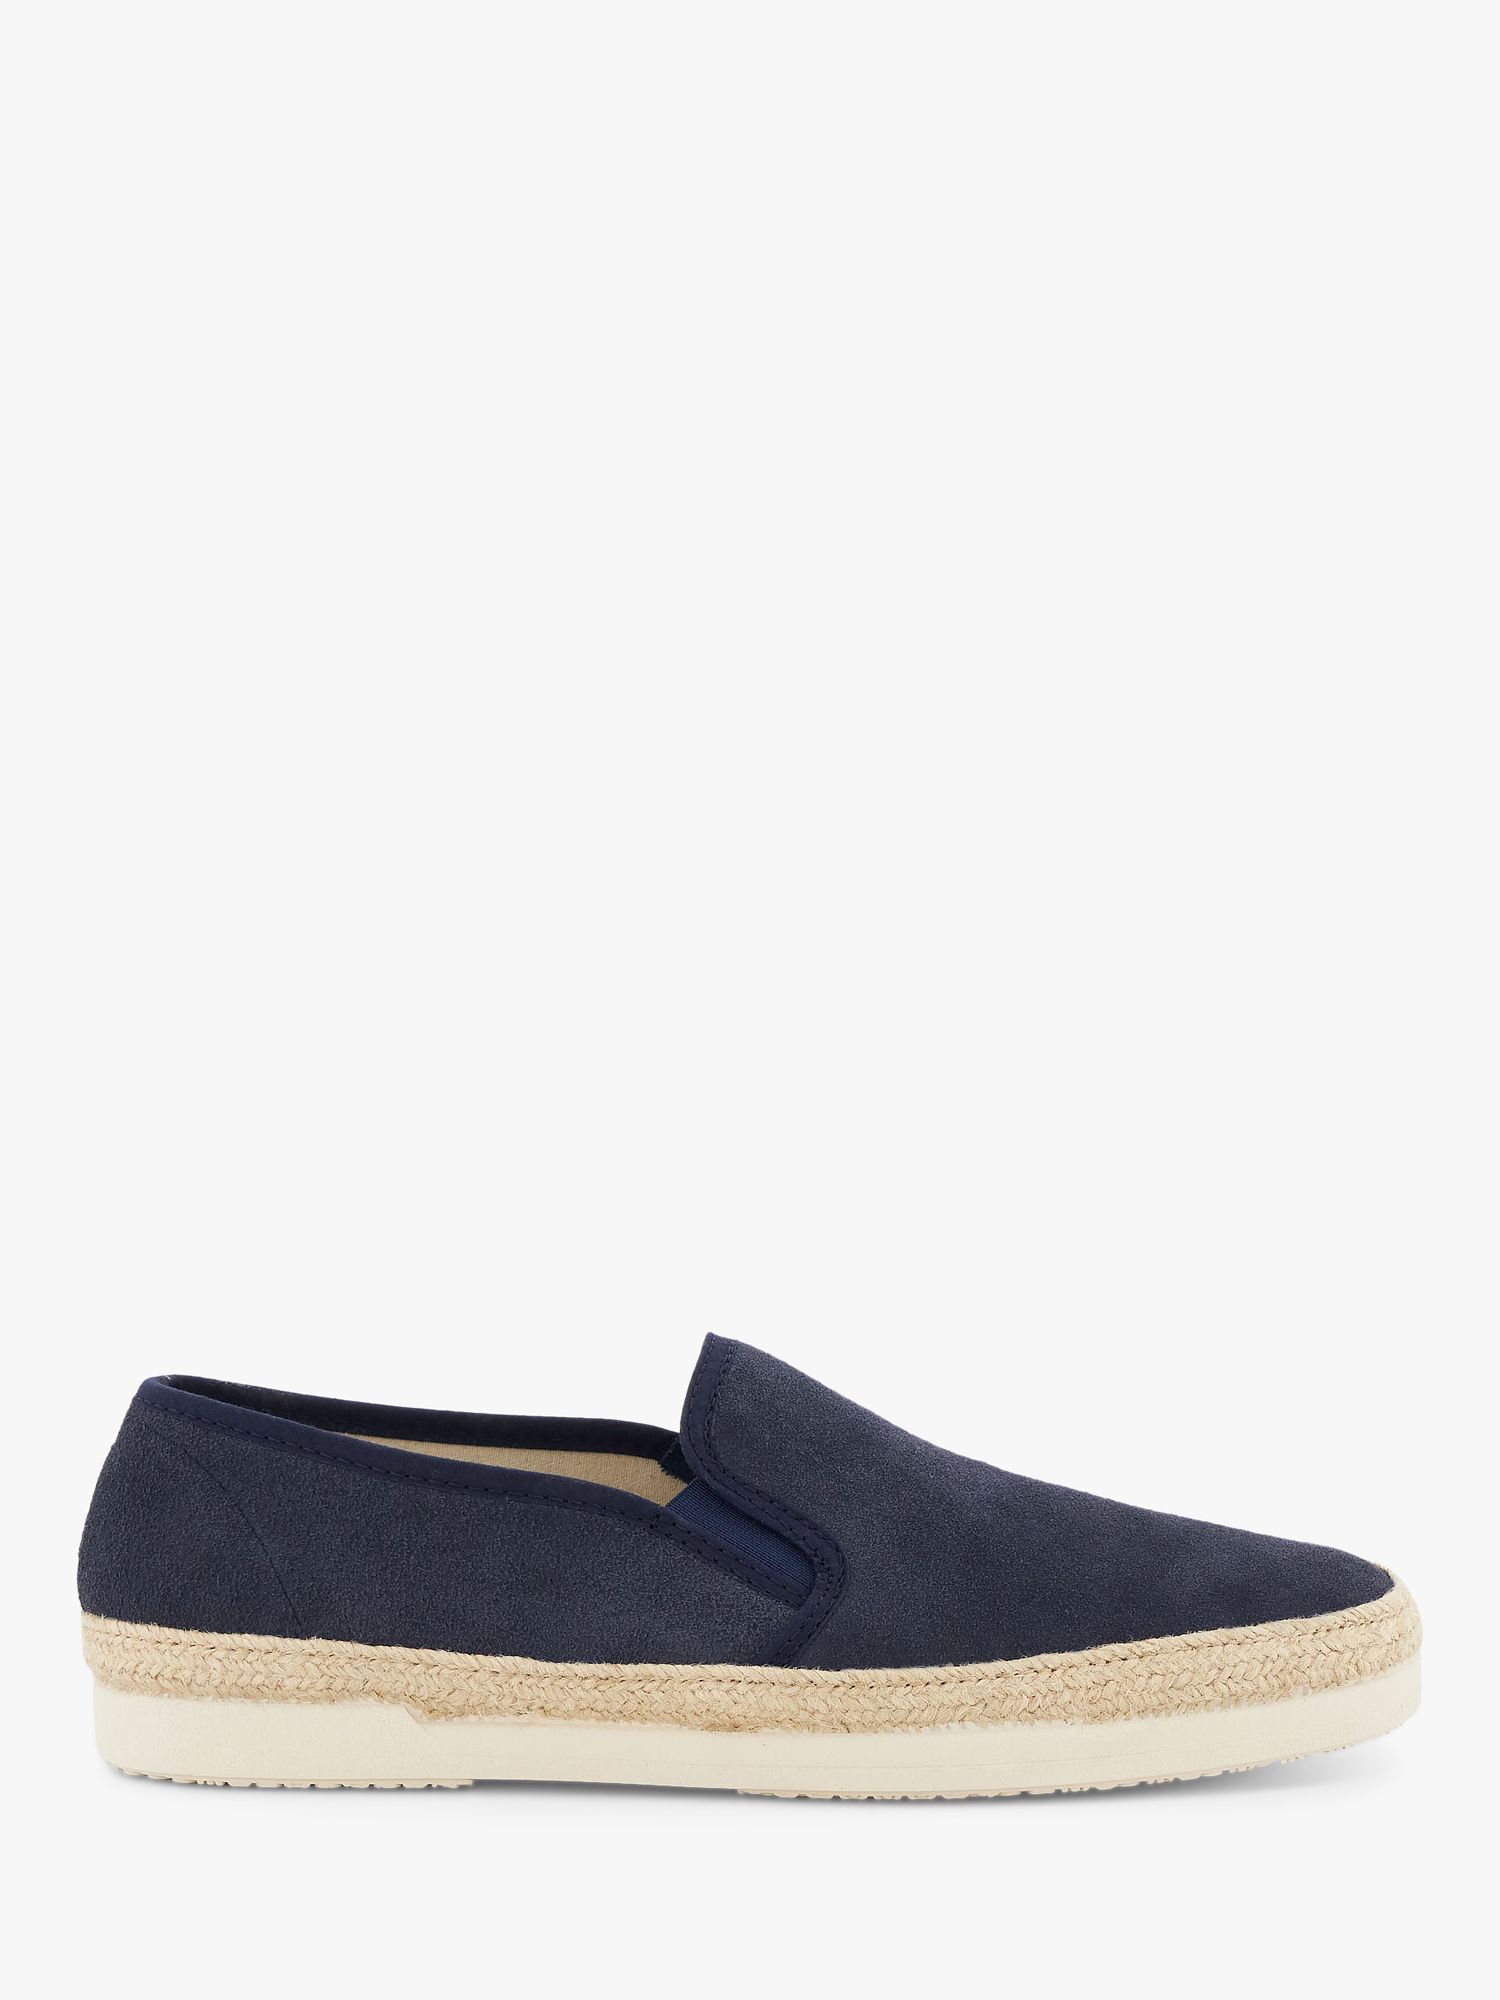 Dune Fall Suede Woven Detail Espadrille Shoes, Navy-suede at John Lewis ...